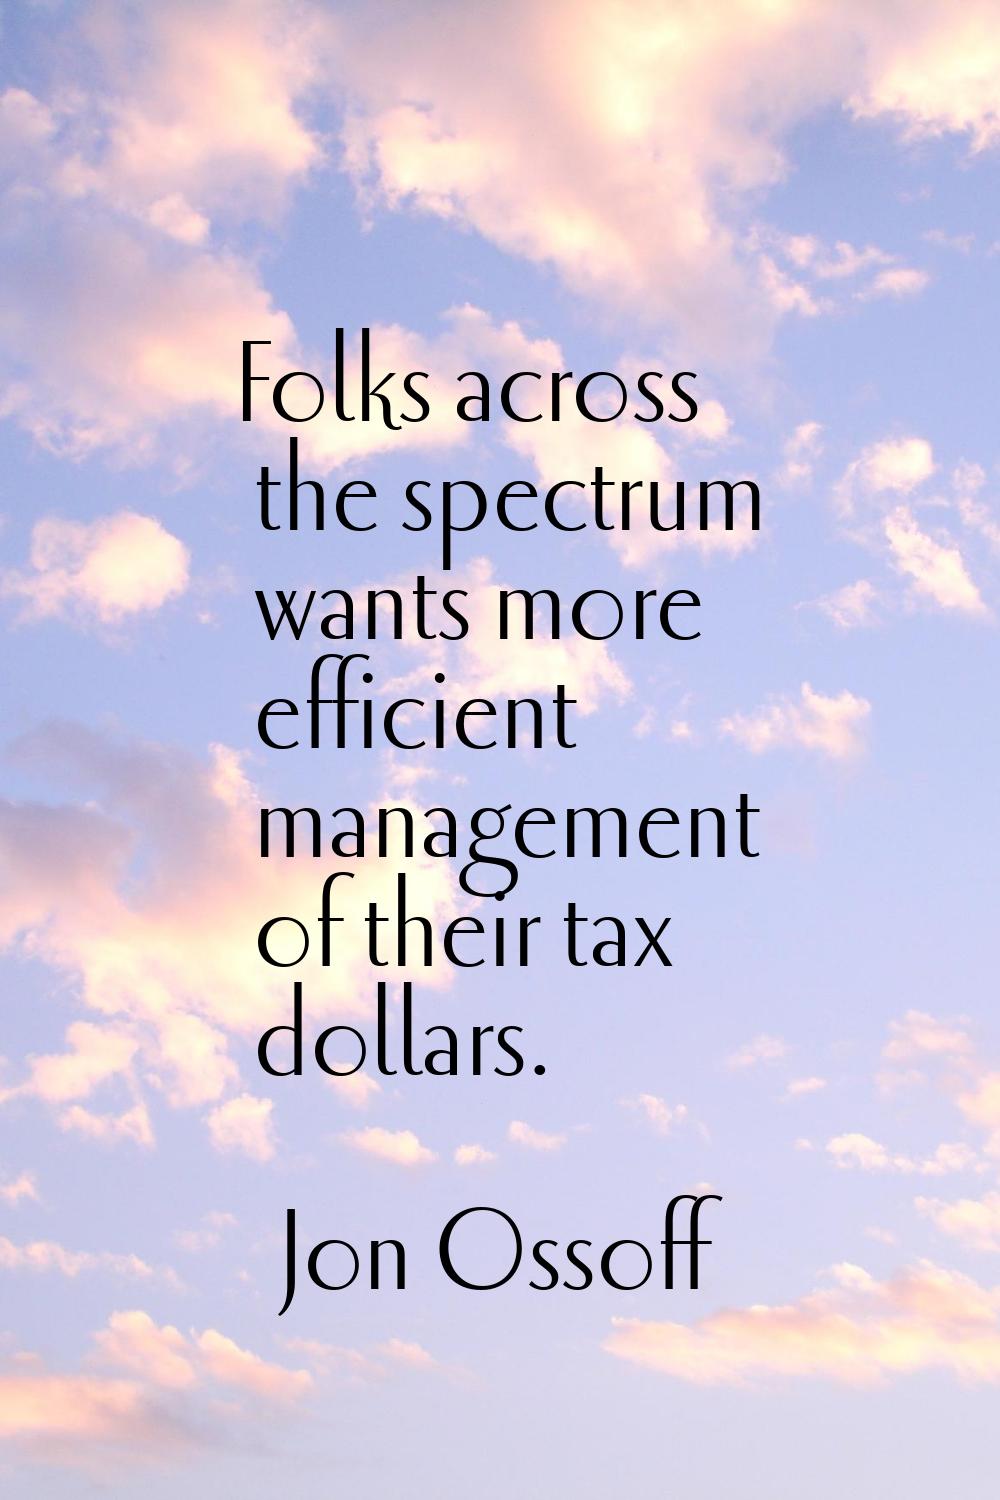 Folks across the spectrum wants more efficient management of their tax dollars.